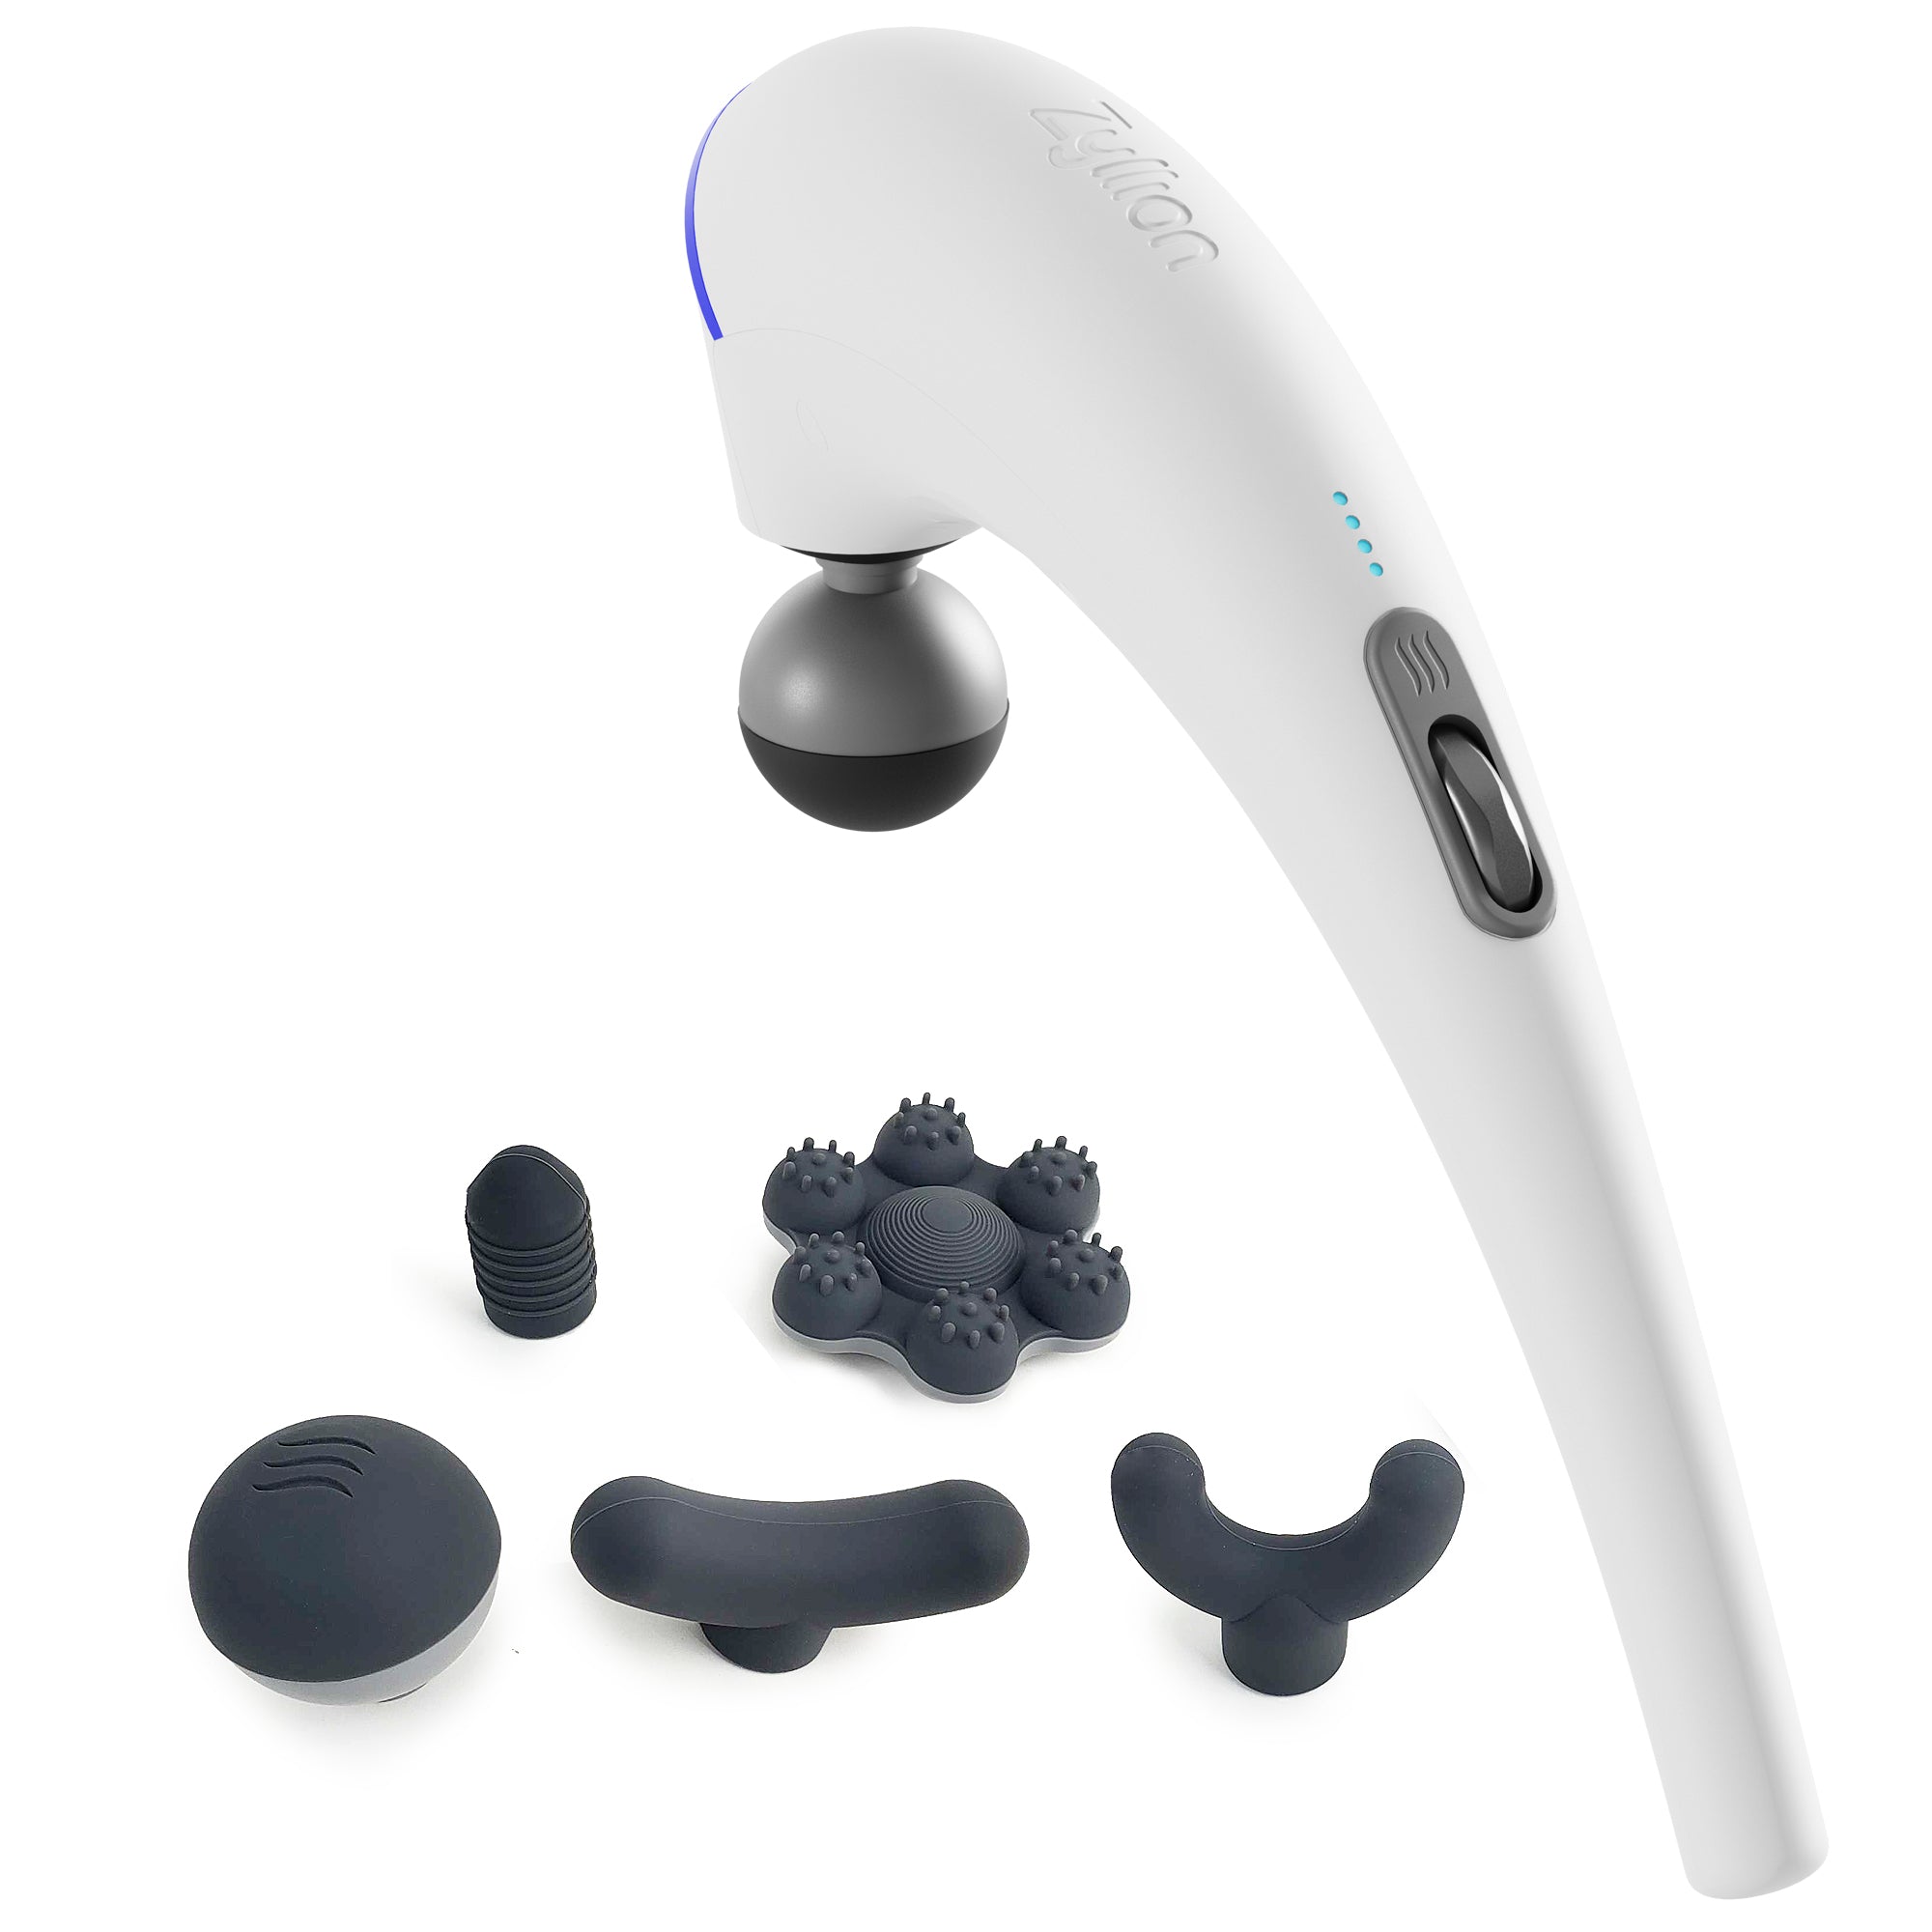 Zyllion Zma-27 Cordless Rechargeable Handheld Massager With Heat - White :  Target